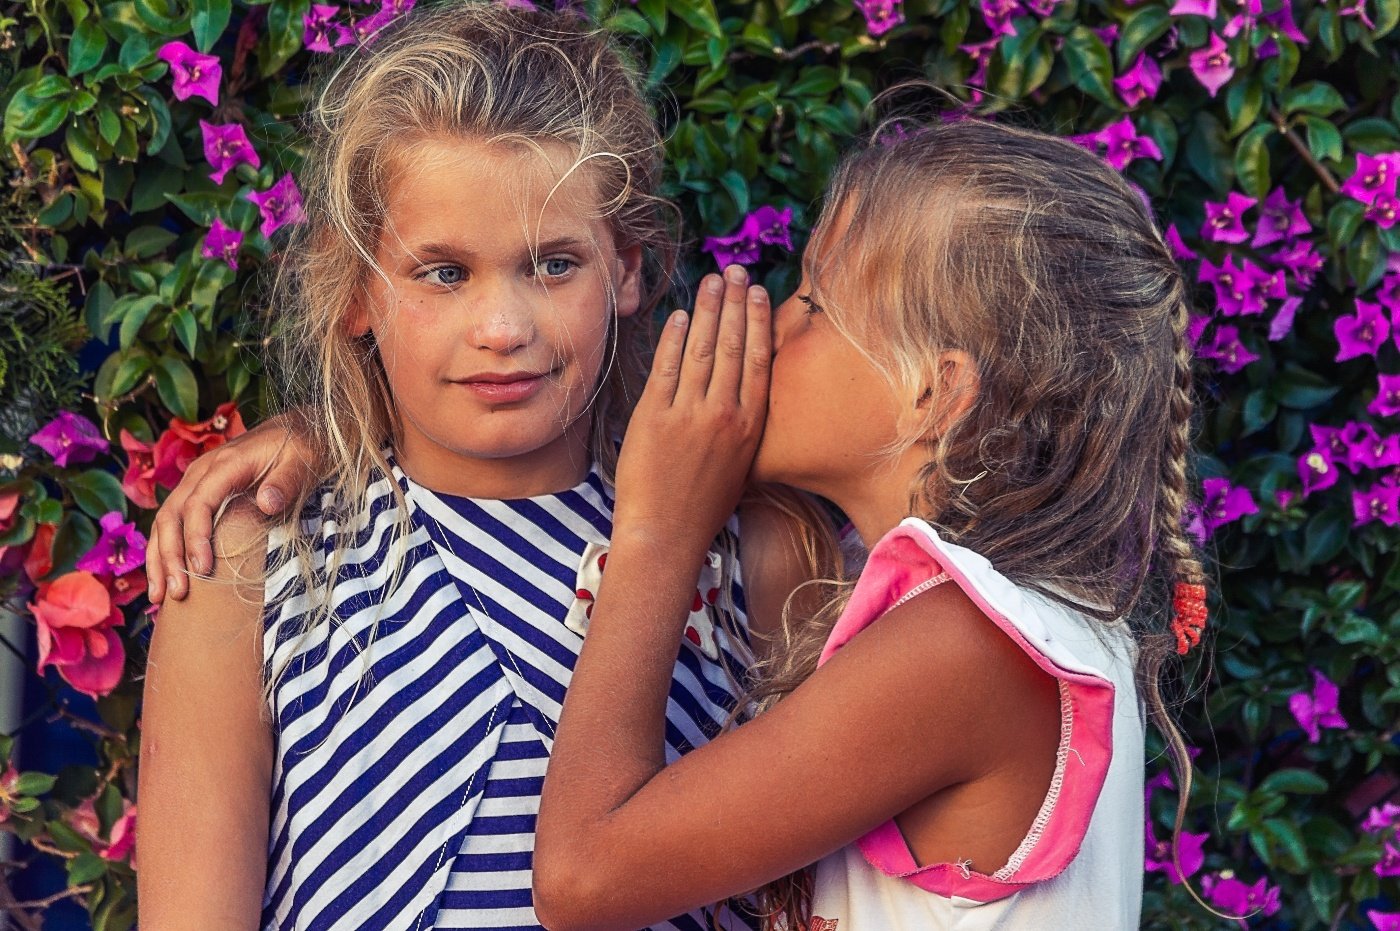 A girl whispers her secret into the ear of a nearby friend.